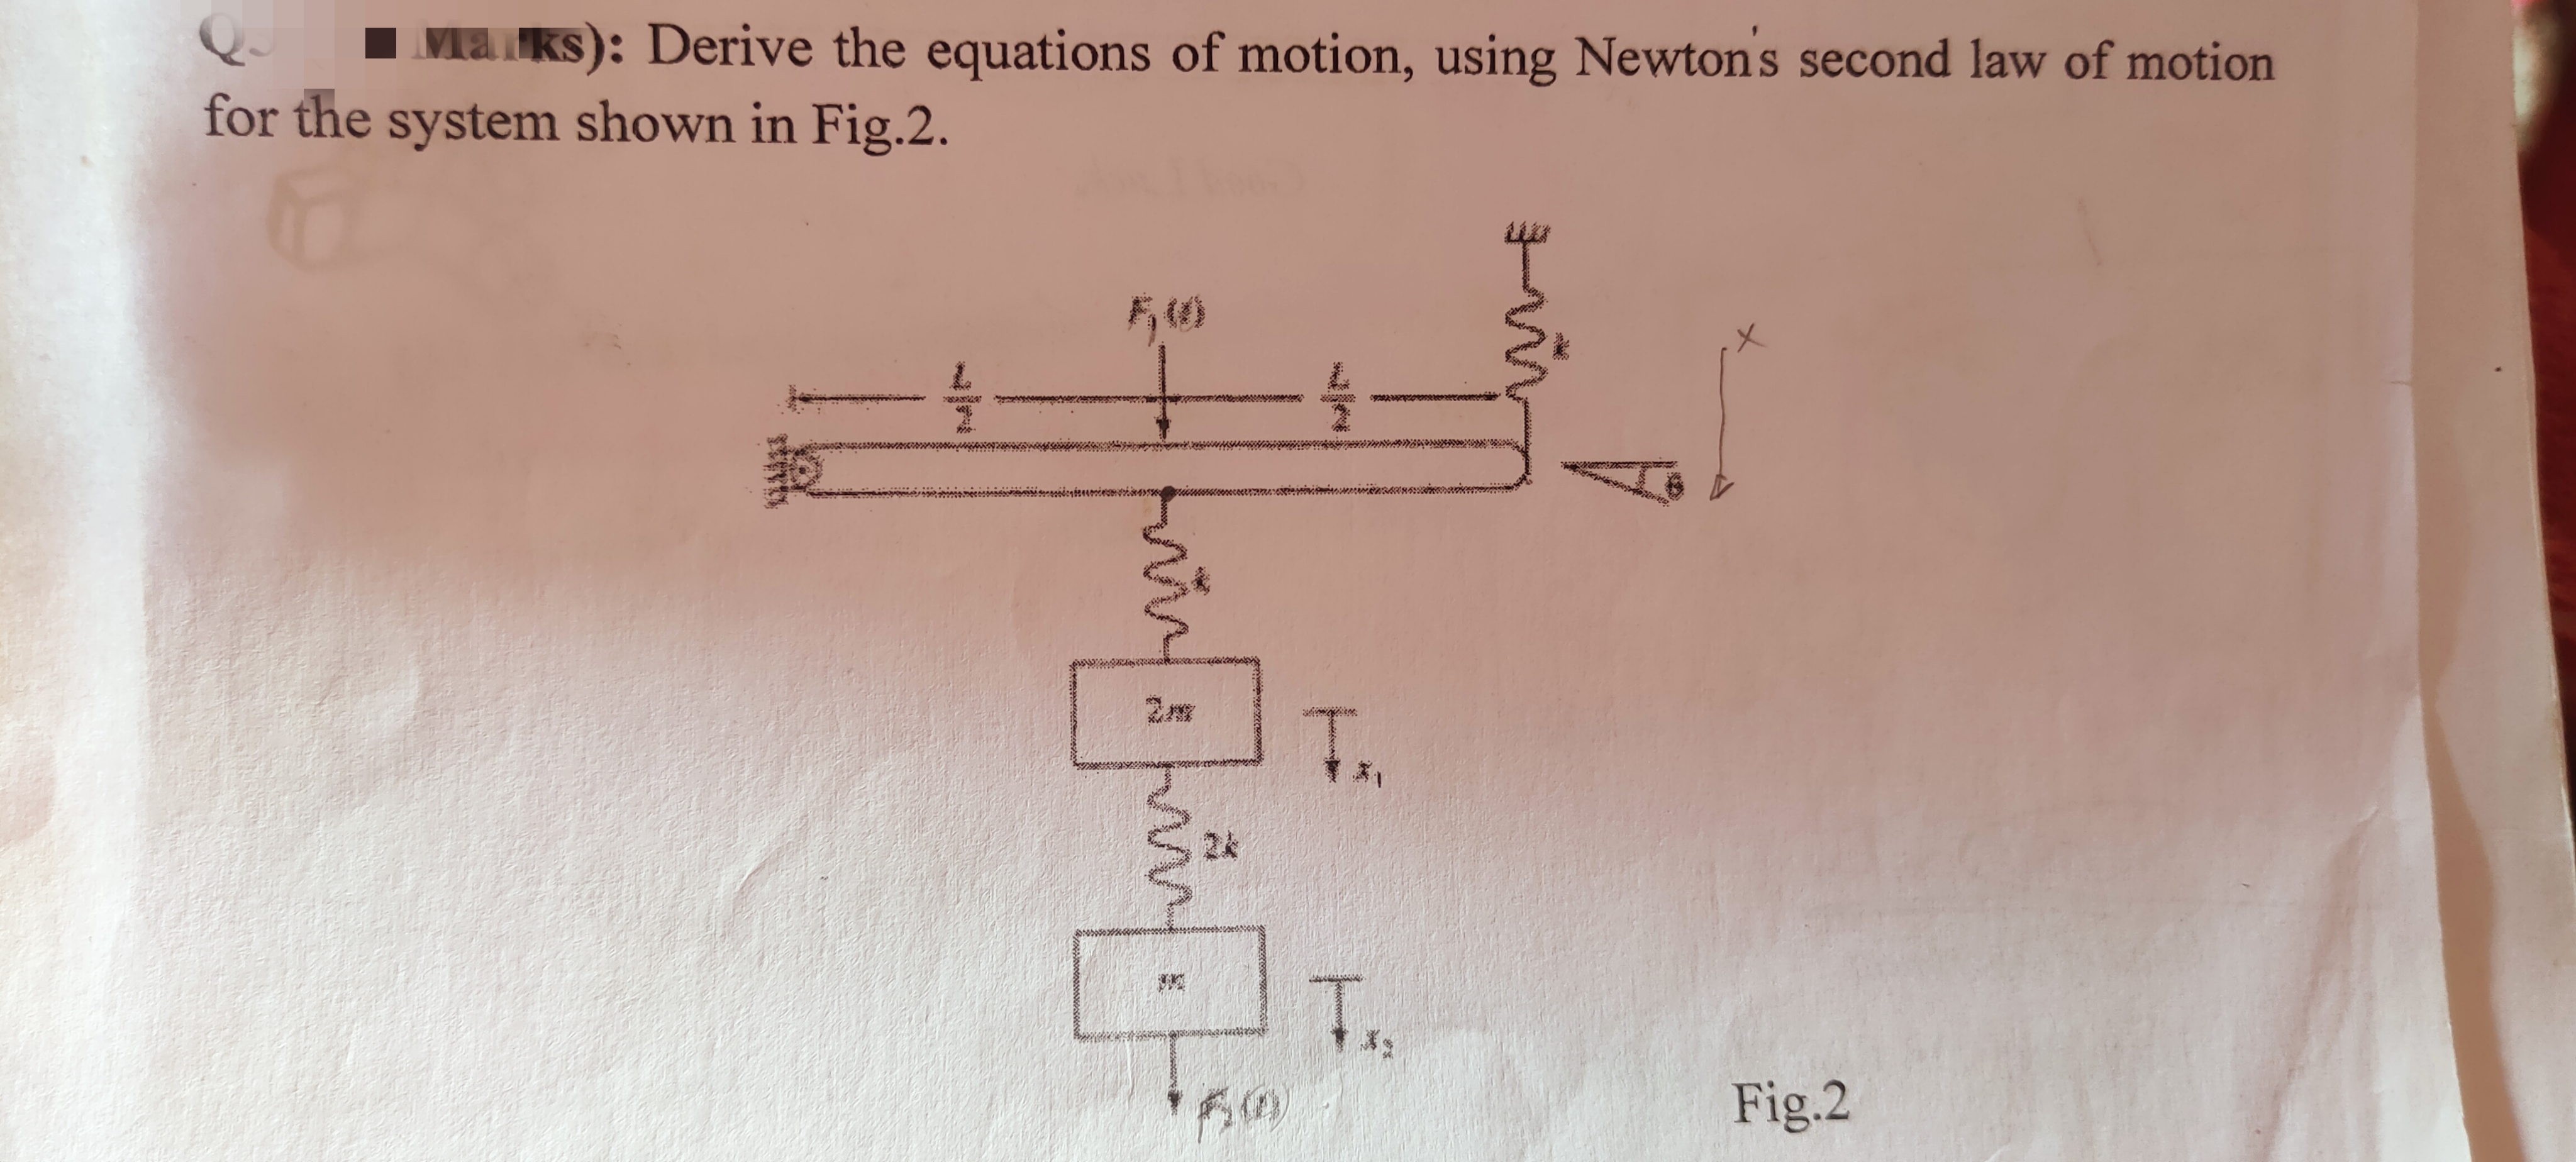 Marks): Derive the equations of motion, using Newton's second law of motion
for the system shown in Fig.2.
*
R
bangla
Tx₁
T₁₂
To
Fig.2